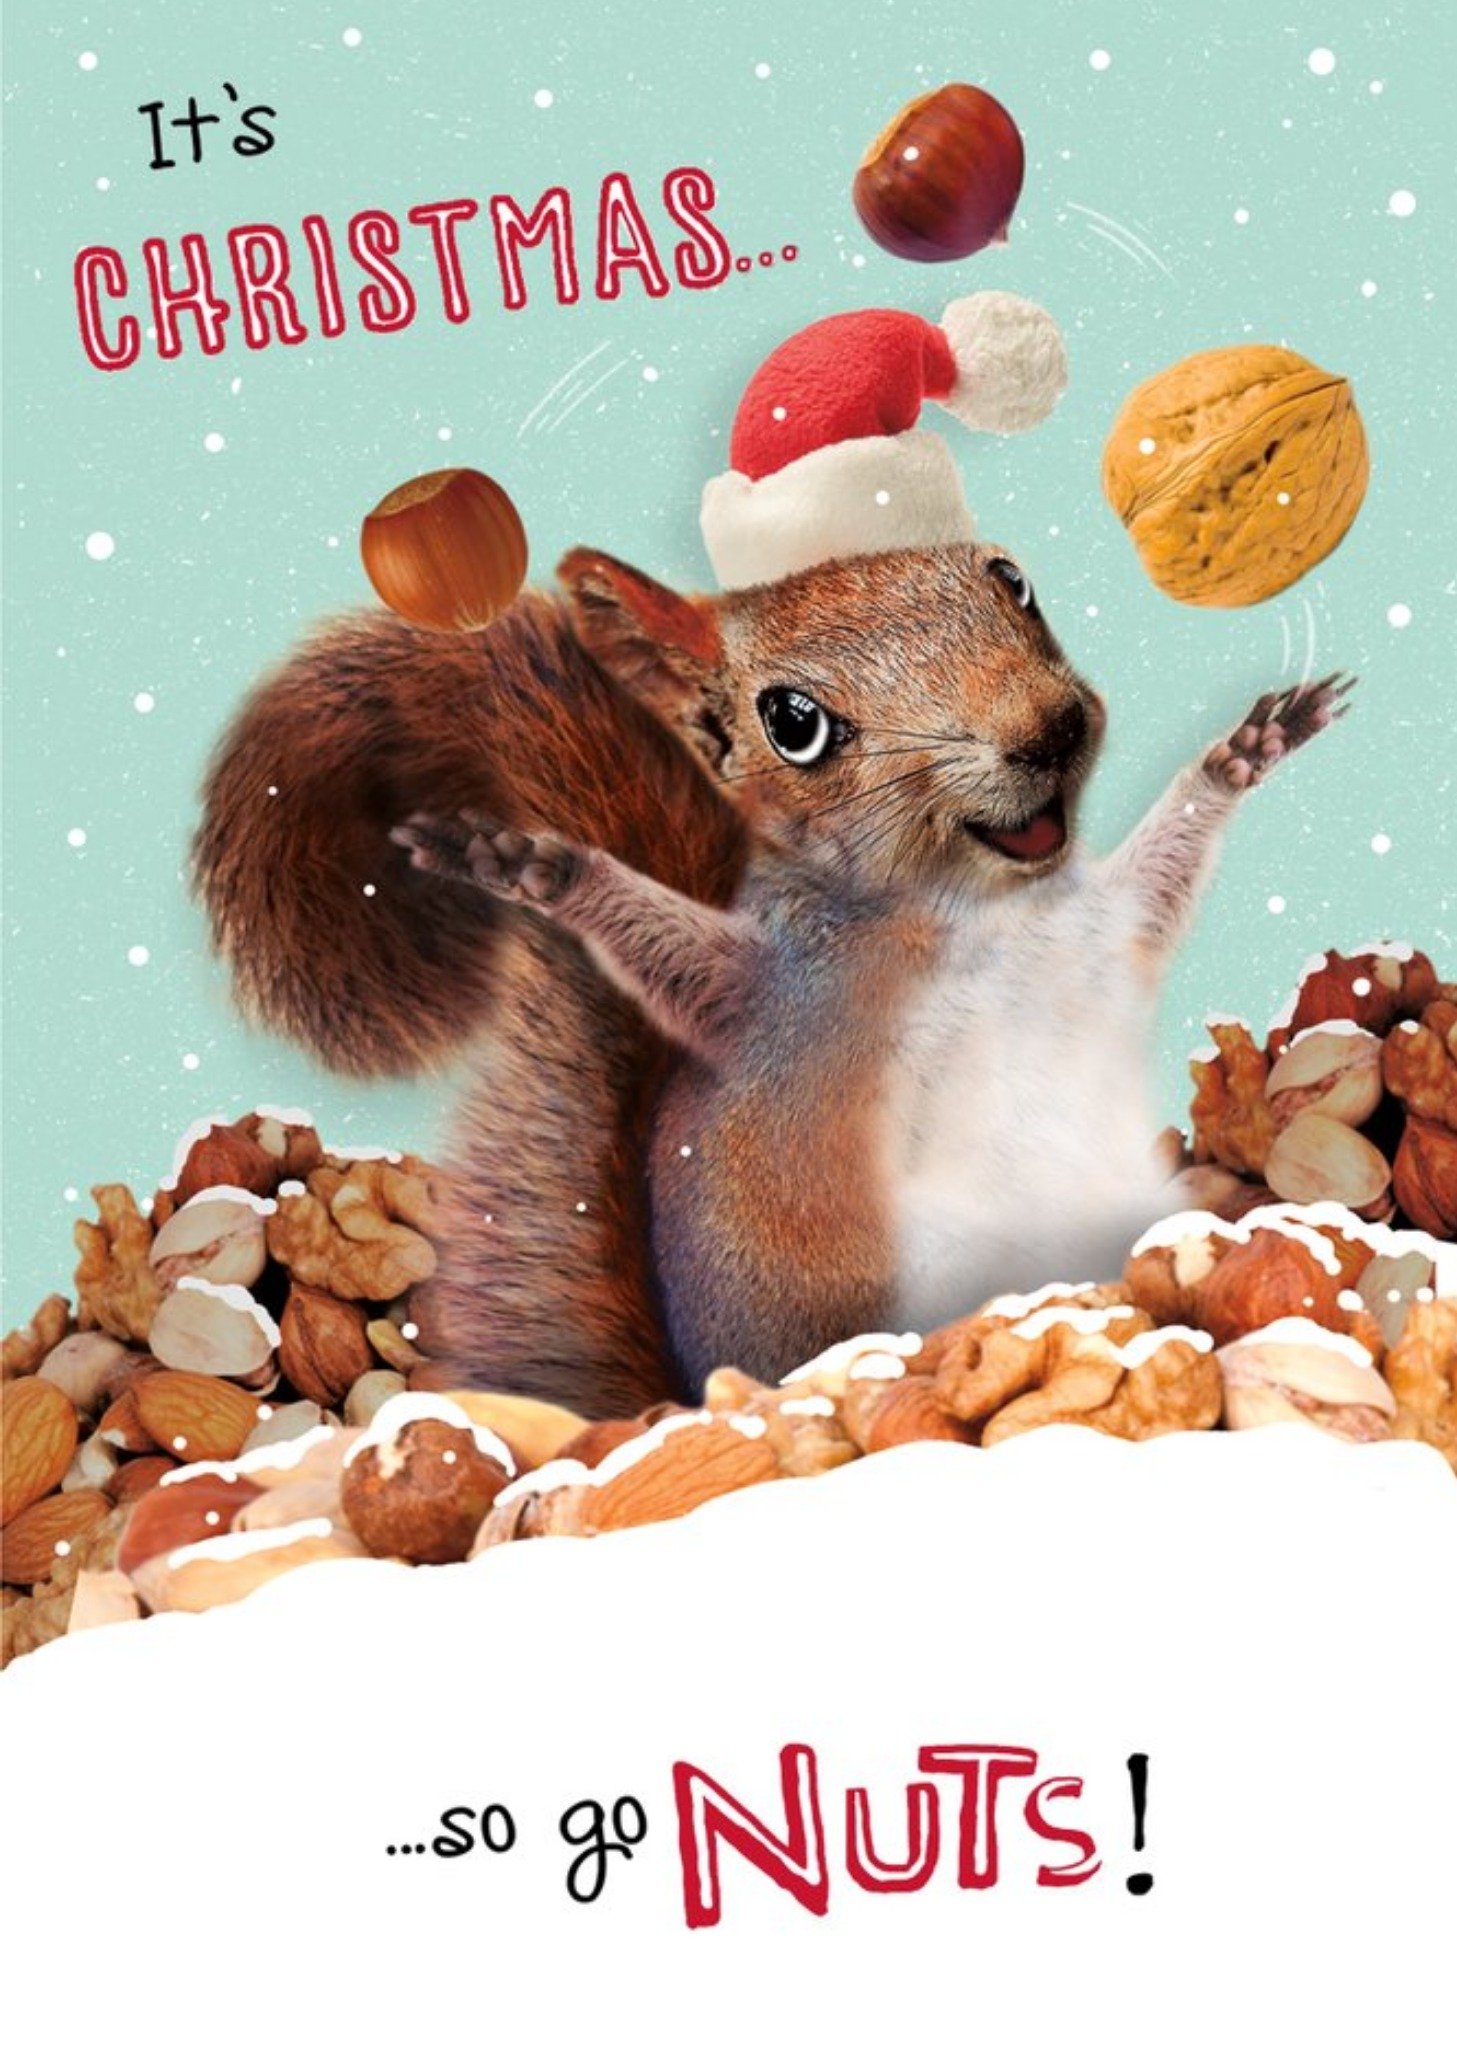 Moonpig Photographic Image Of A Squirrel Surrounded By Nuts Funny Pun Christmas Card Ecard